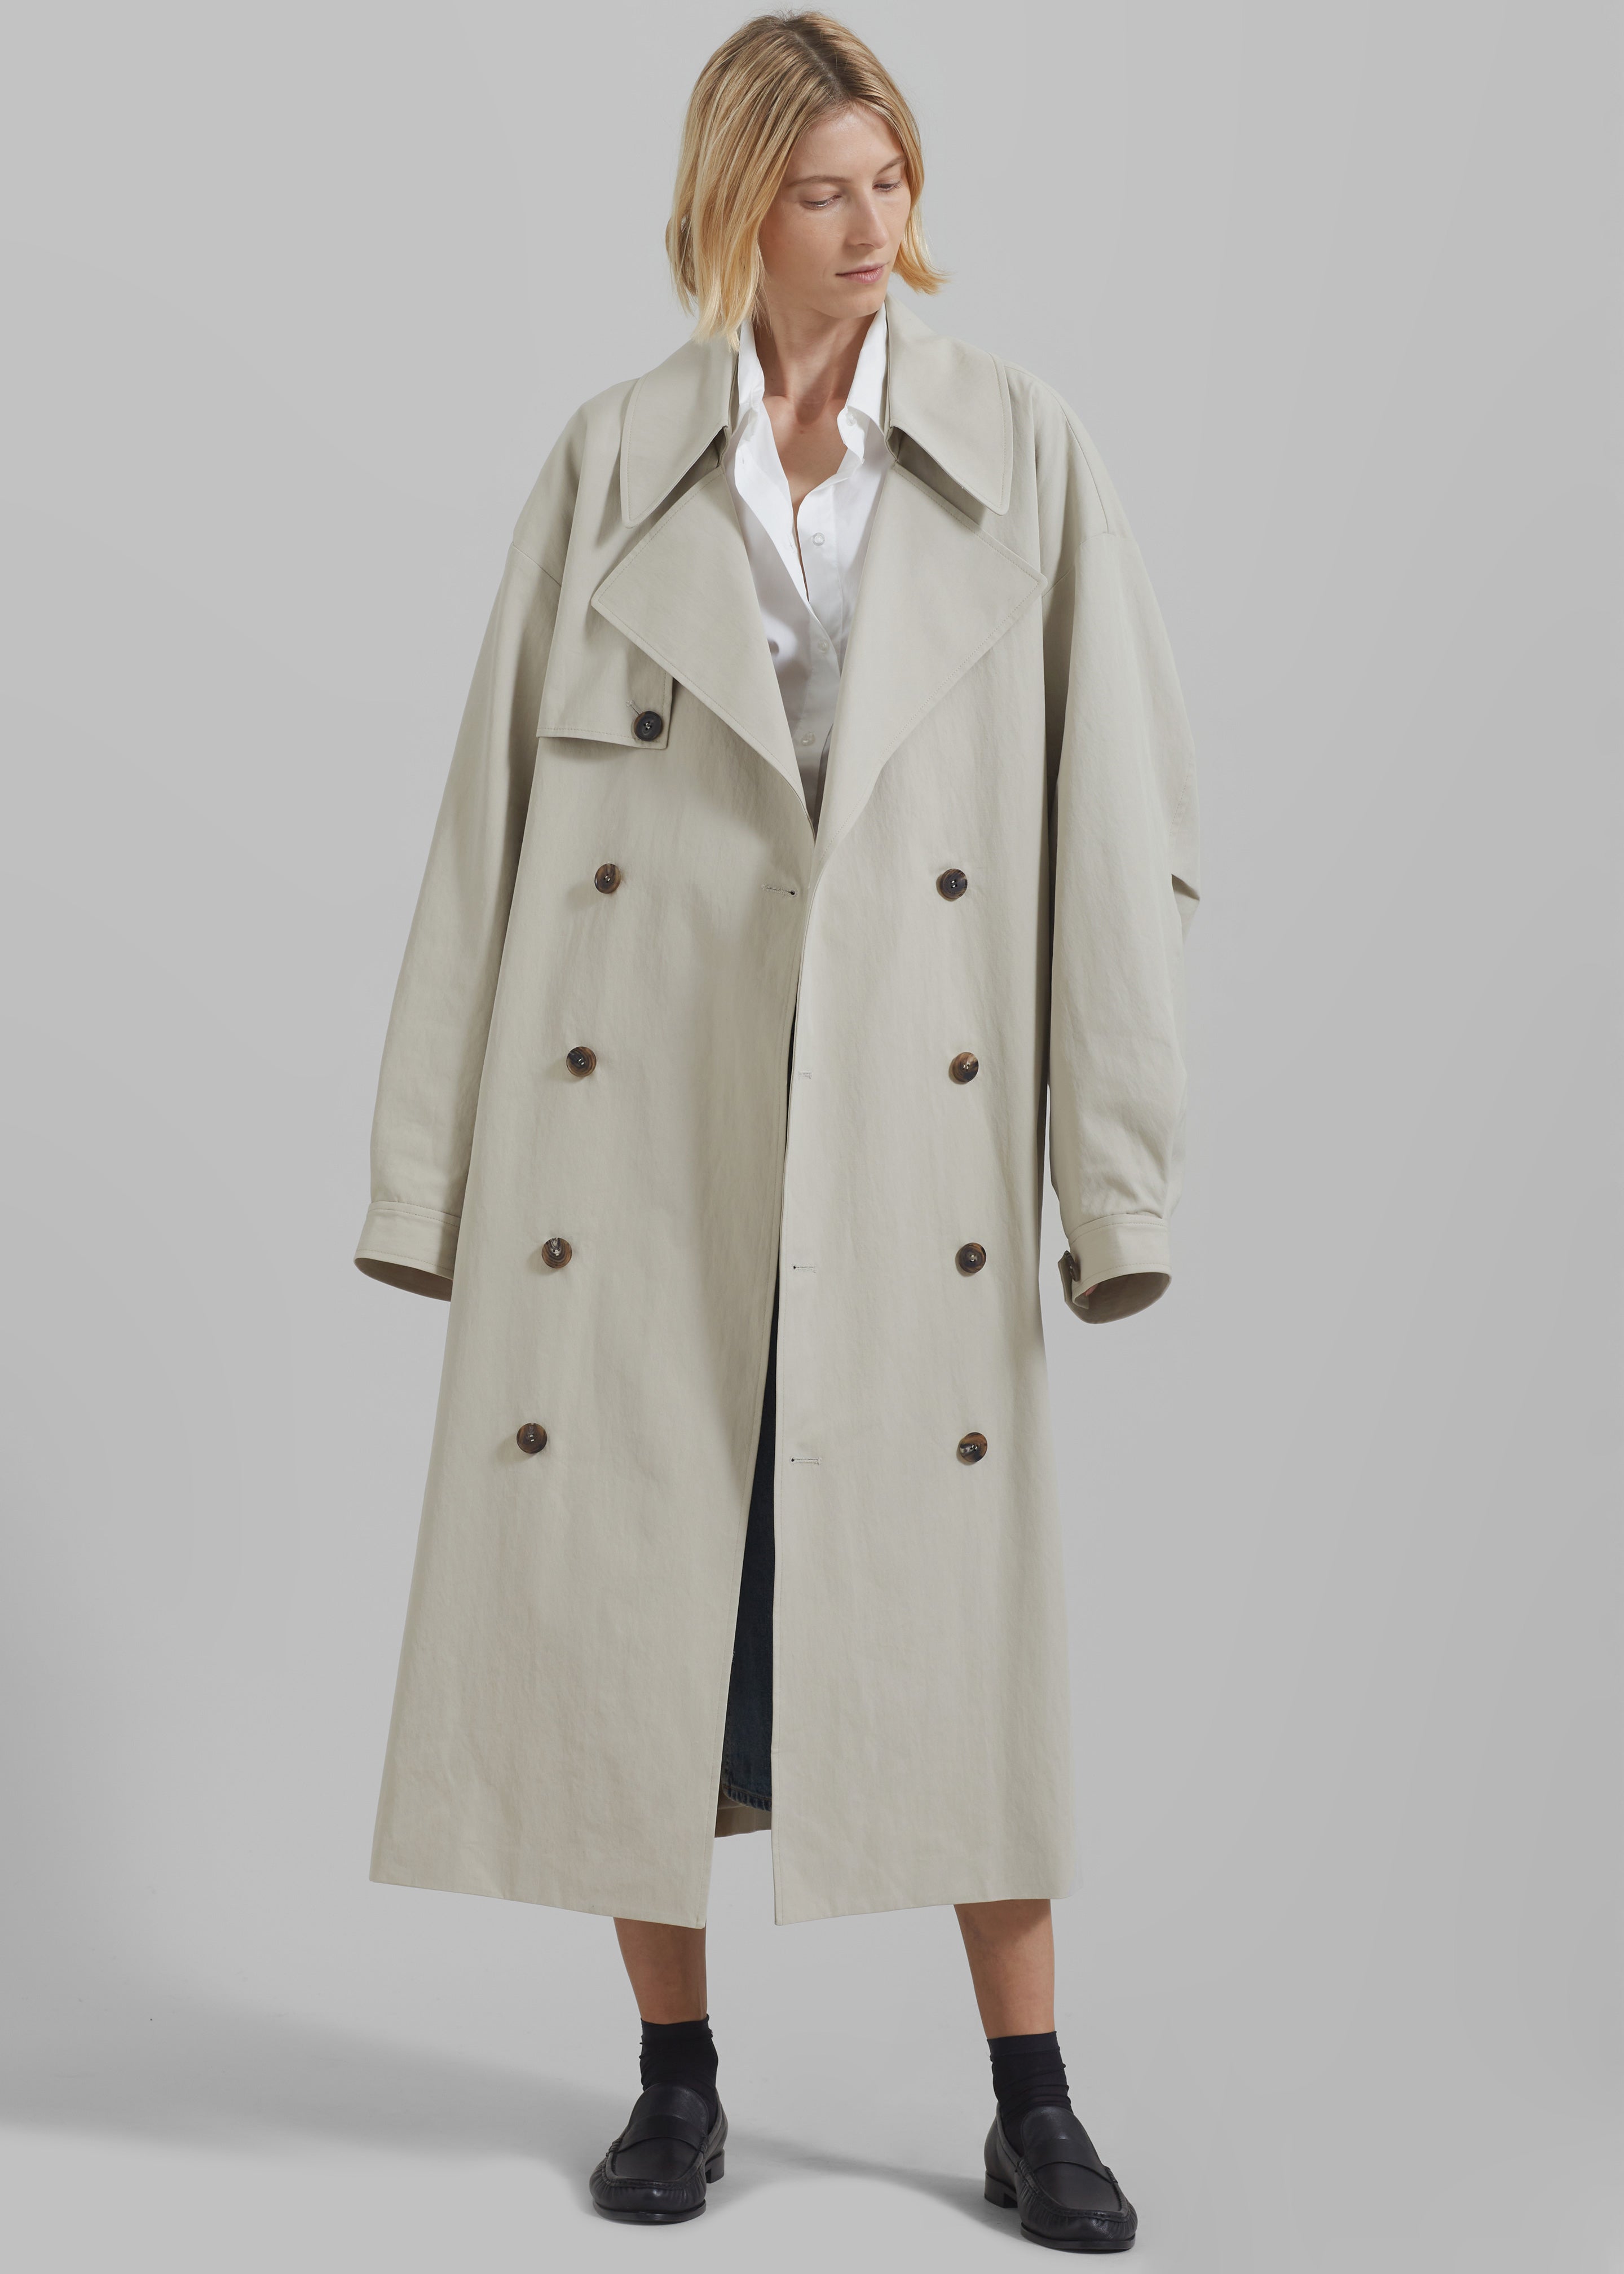 Anika Double Breasted Trench Coat - Beige - 8